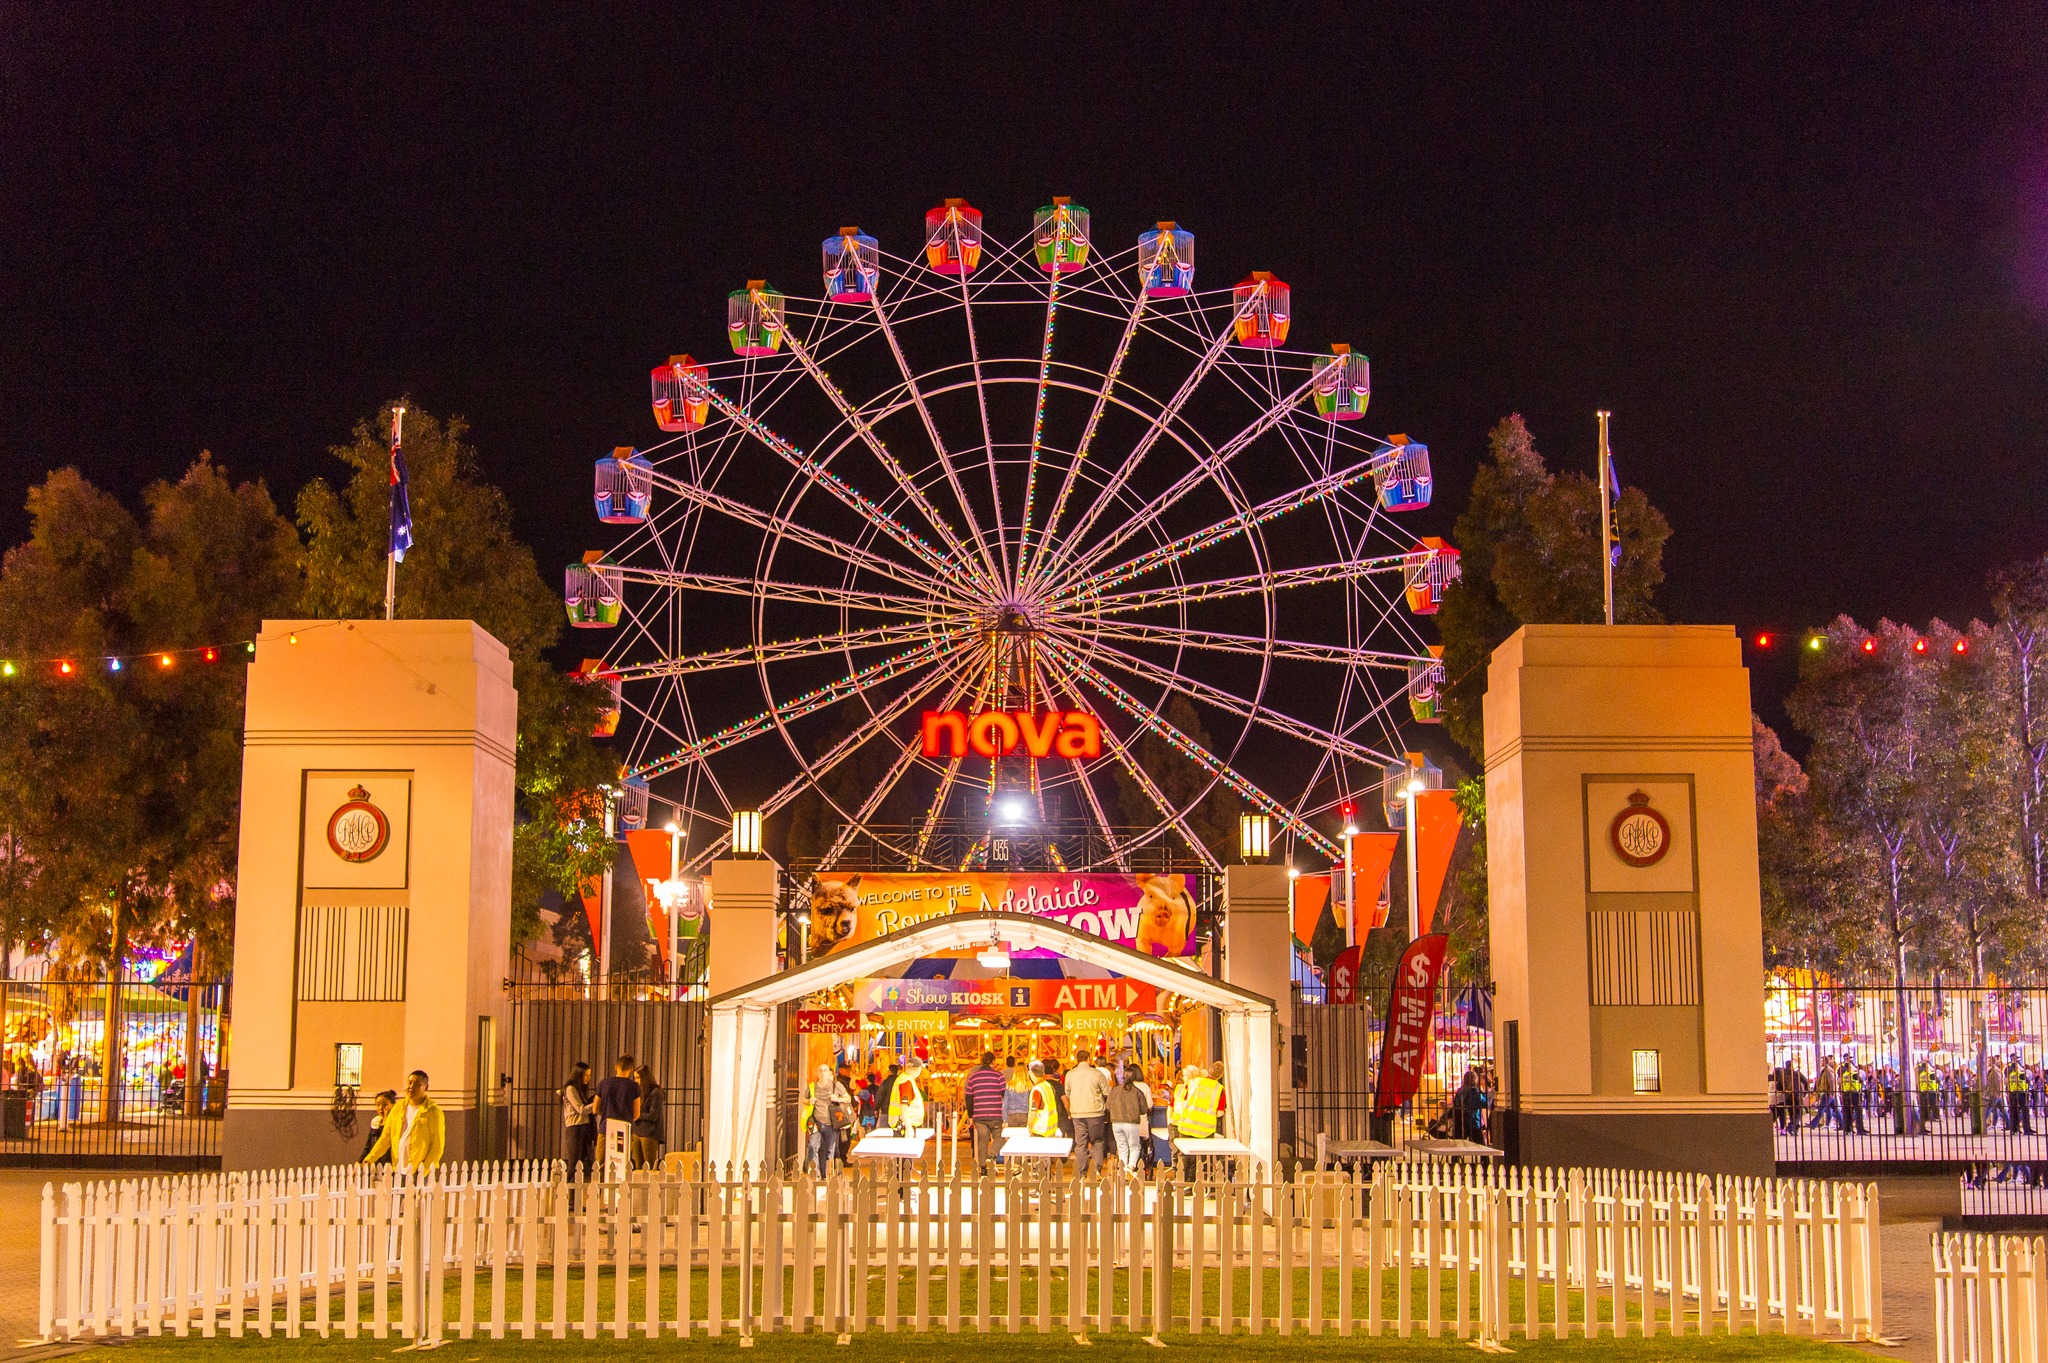 WIN one of two Royal Adelaide Show $500 prize packs!